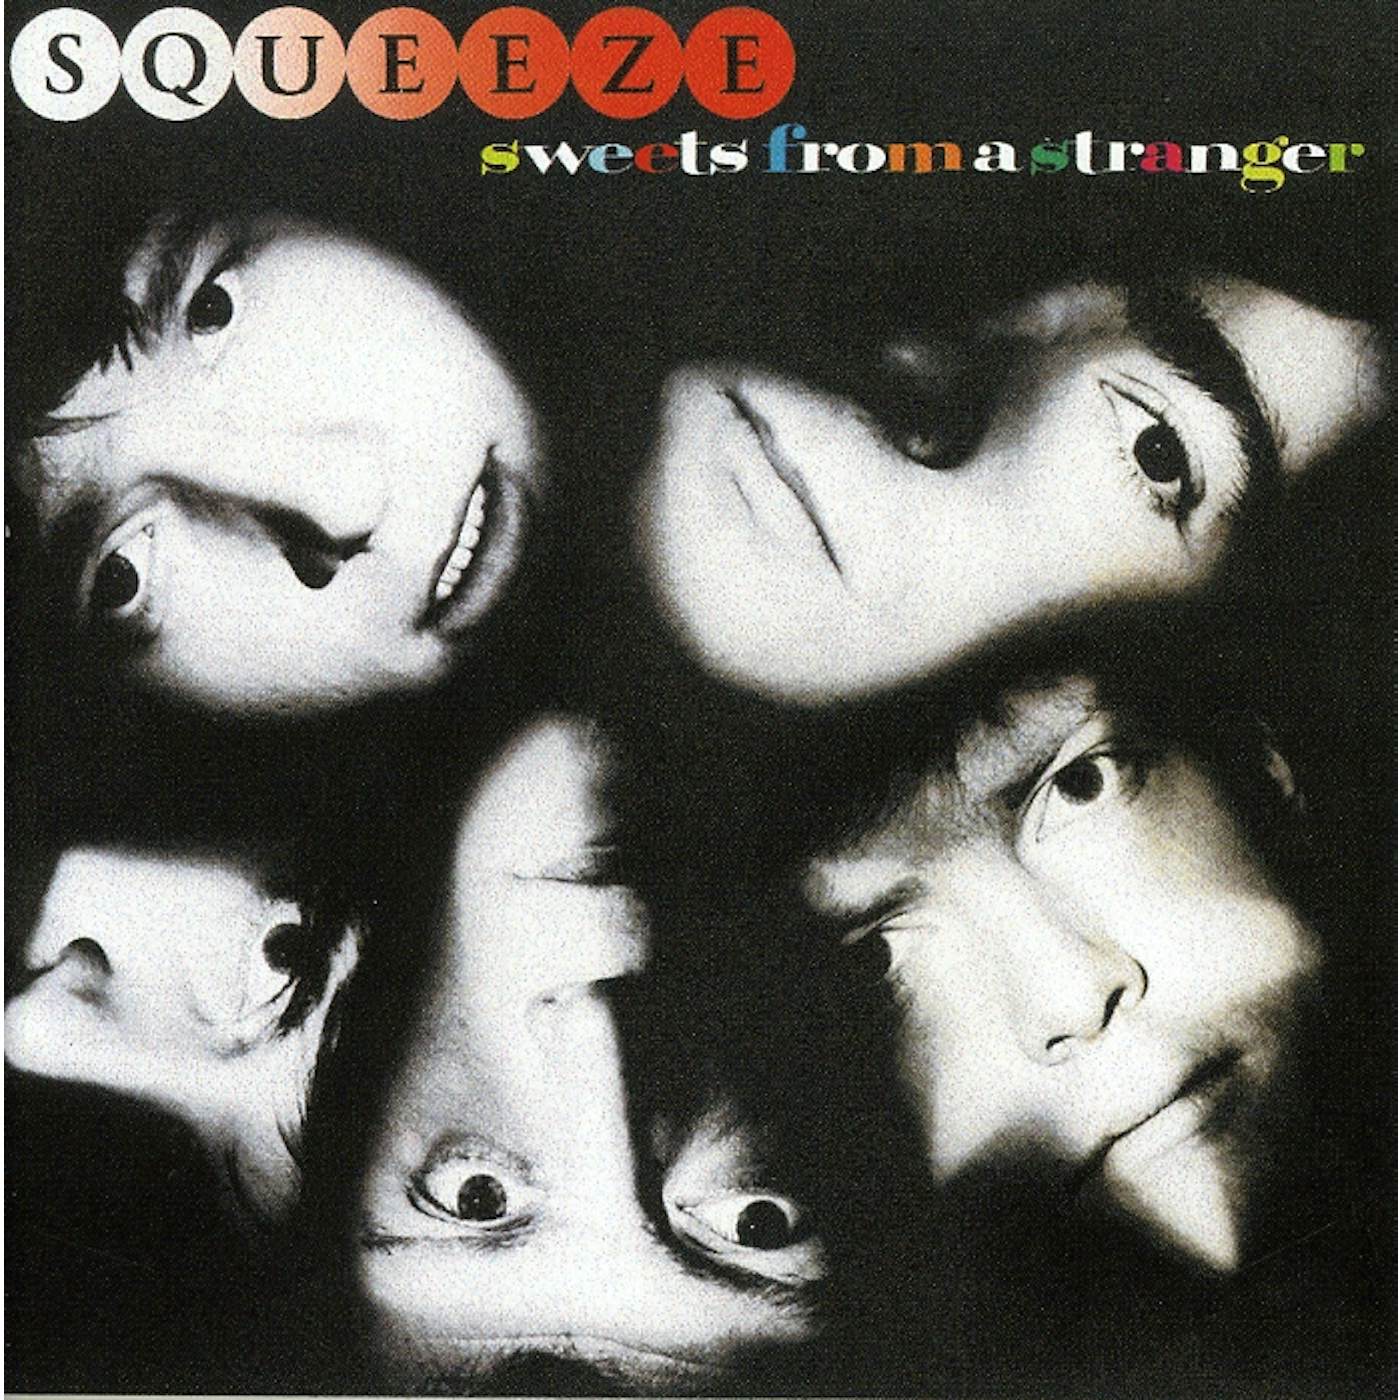 Squeeze SWEETS FROM A STRANGER CD